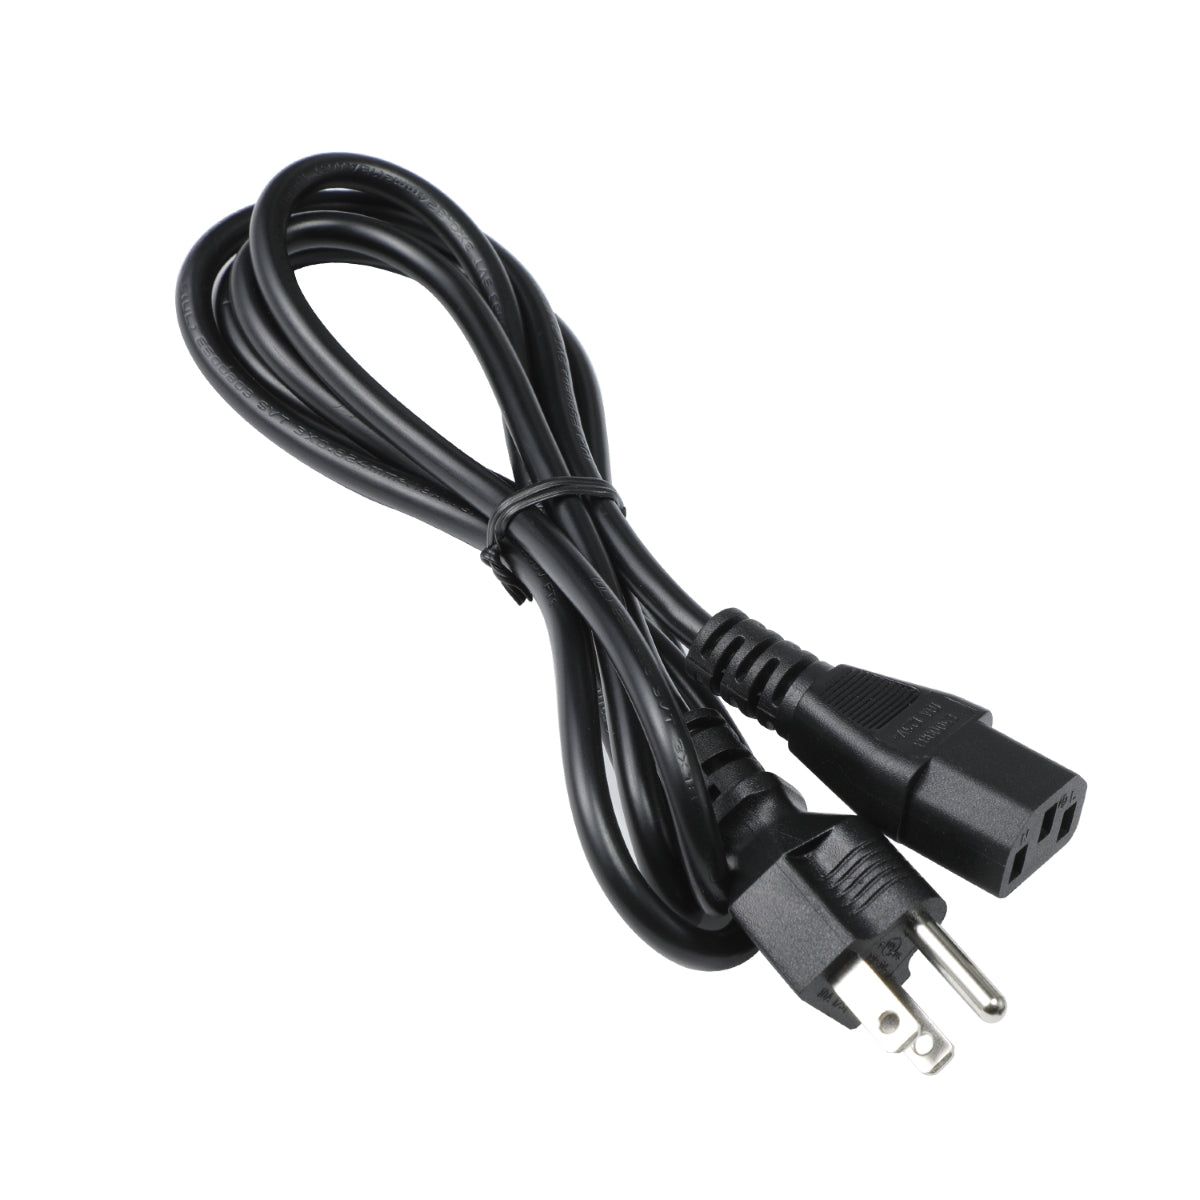 Power Cable for Philips 499P9H Monitor.